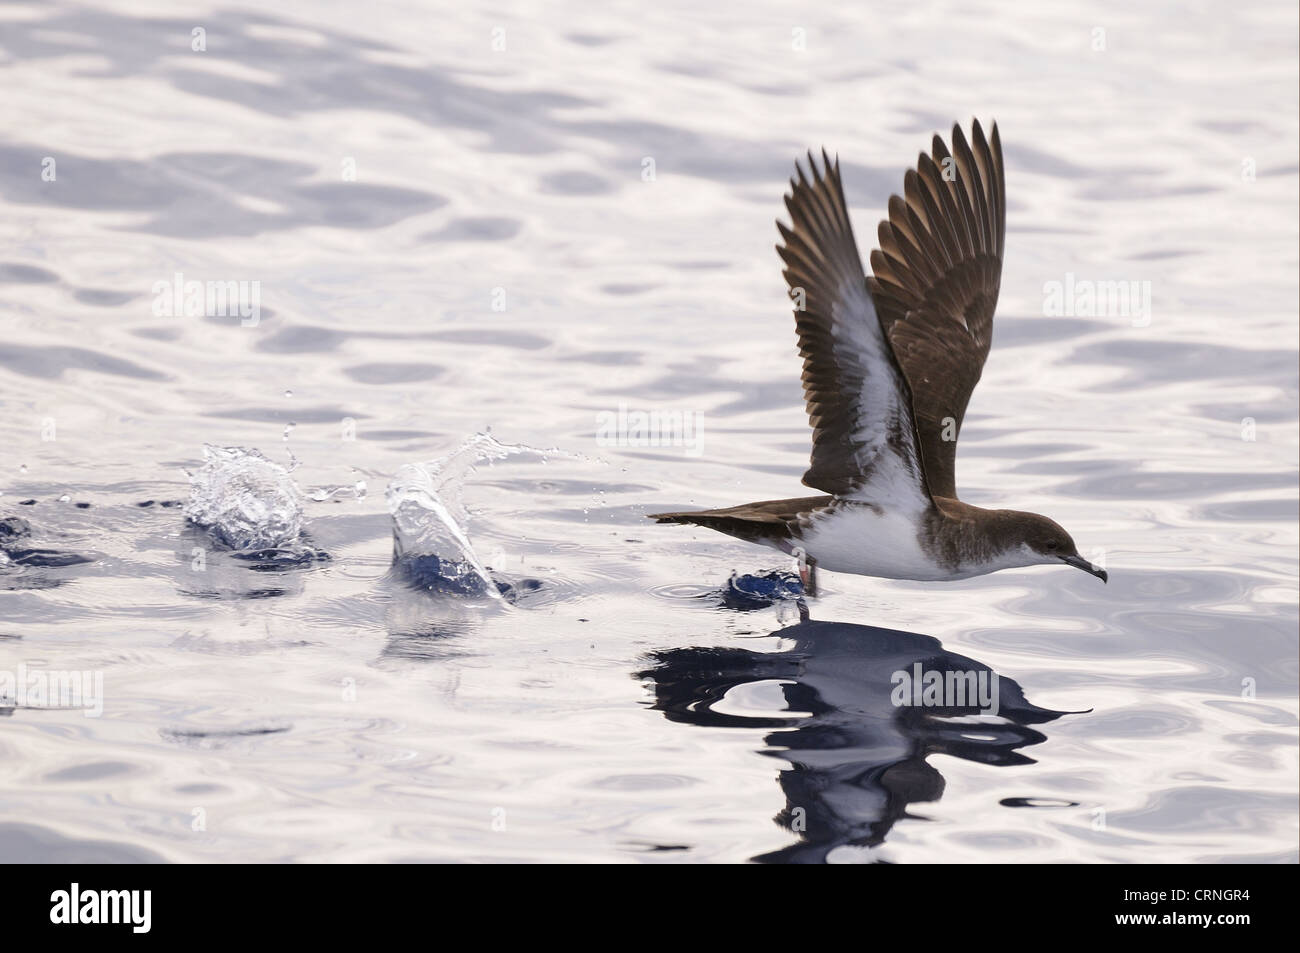 Tropical Shearwater (Puffinus bailloni) adult, in flight, taking off from surface of water, Maldives, march Stock Photo